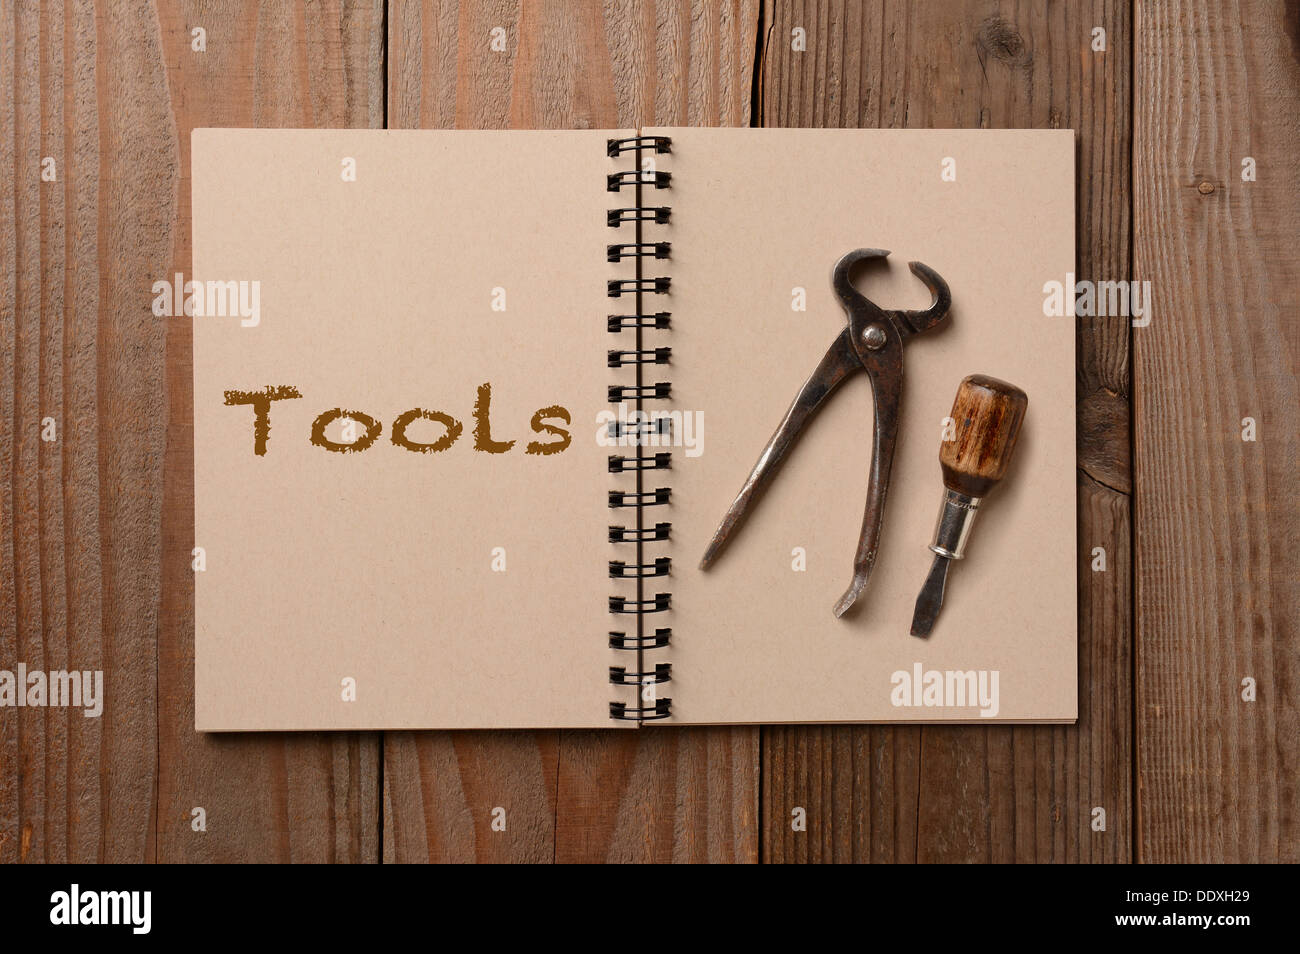 Two tools on the blank page of a notebook. The opposite page has the word Tools spelled out. Stock Photo